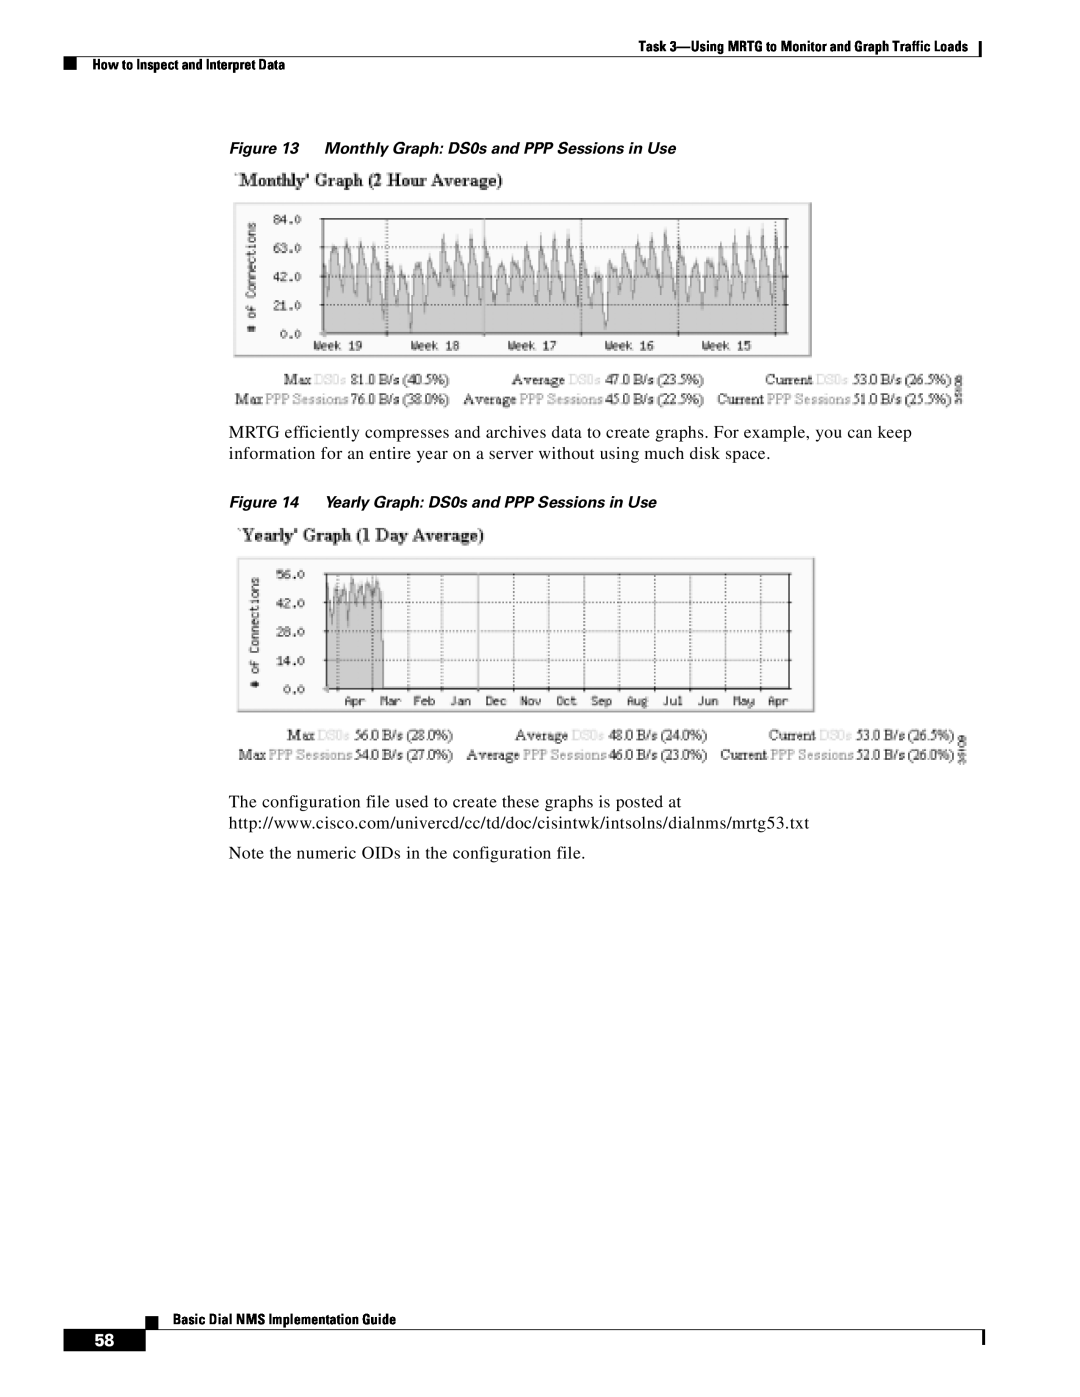 Cisco Systems Dial NMS manual The configuration file used to create these graphs is posted at 